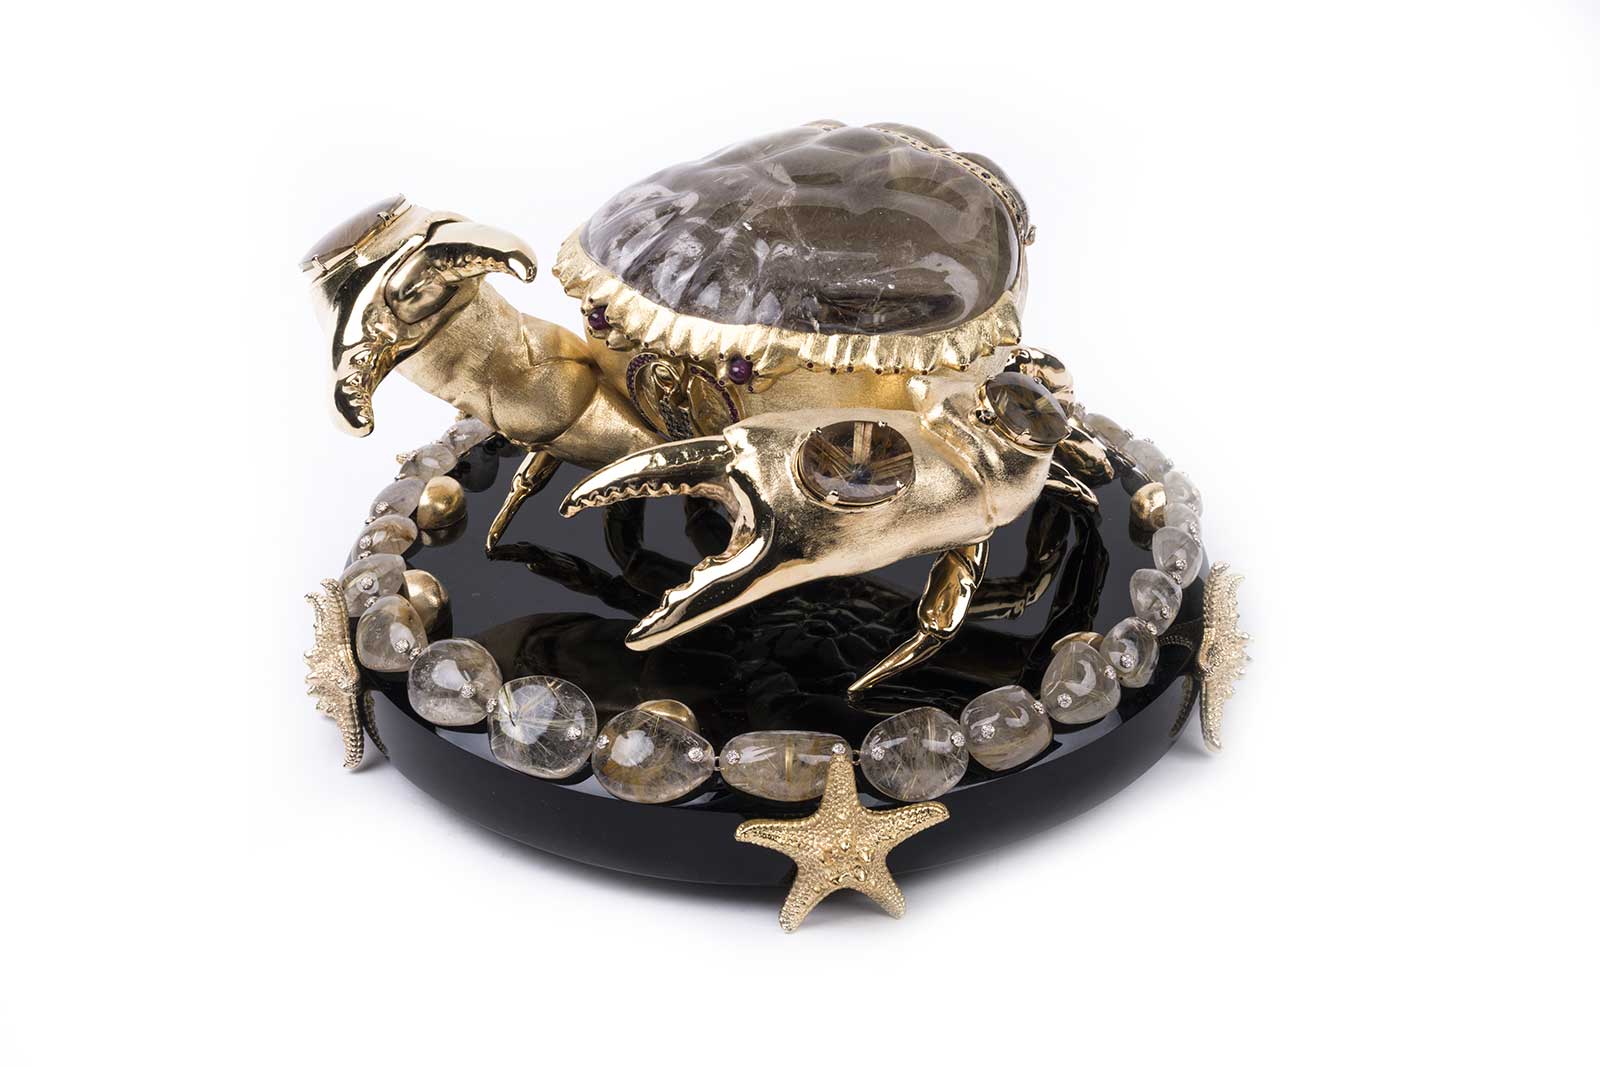 L’Aquart ‘The Crab Prince’ in hand carved Brazilian golden rutilated quartz, gold and diamonds,  in obsidian